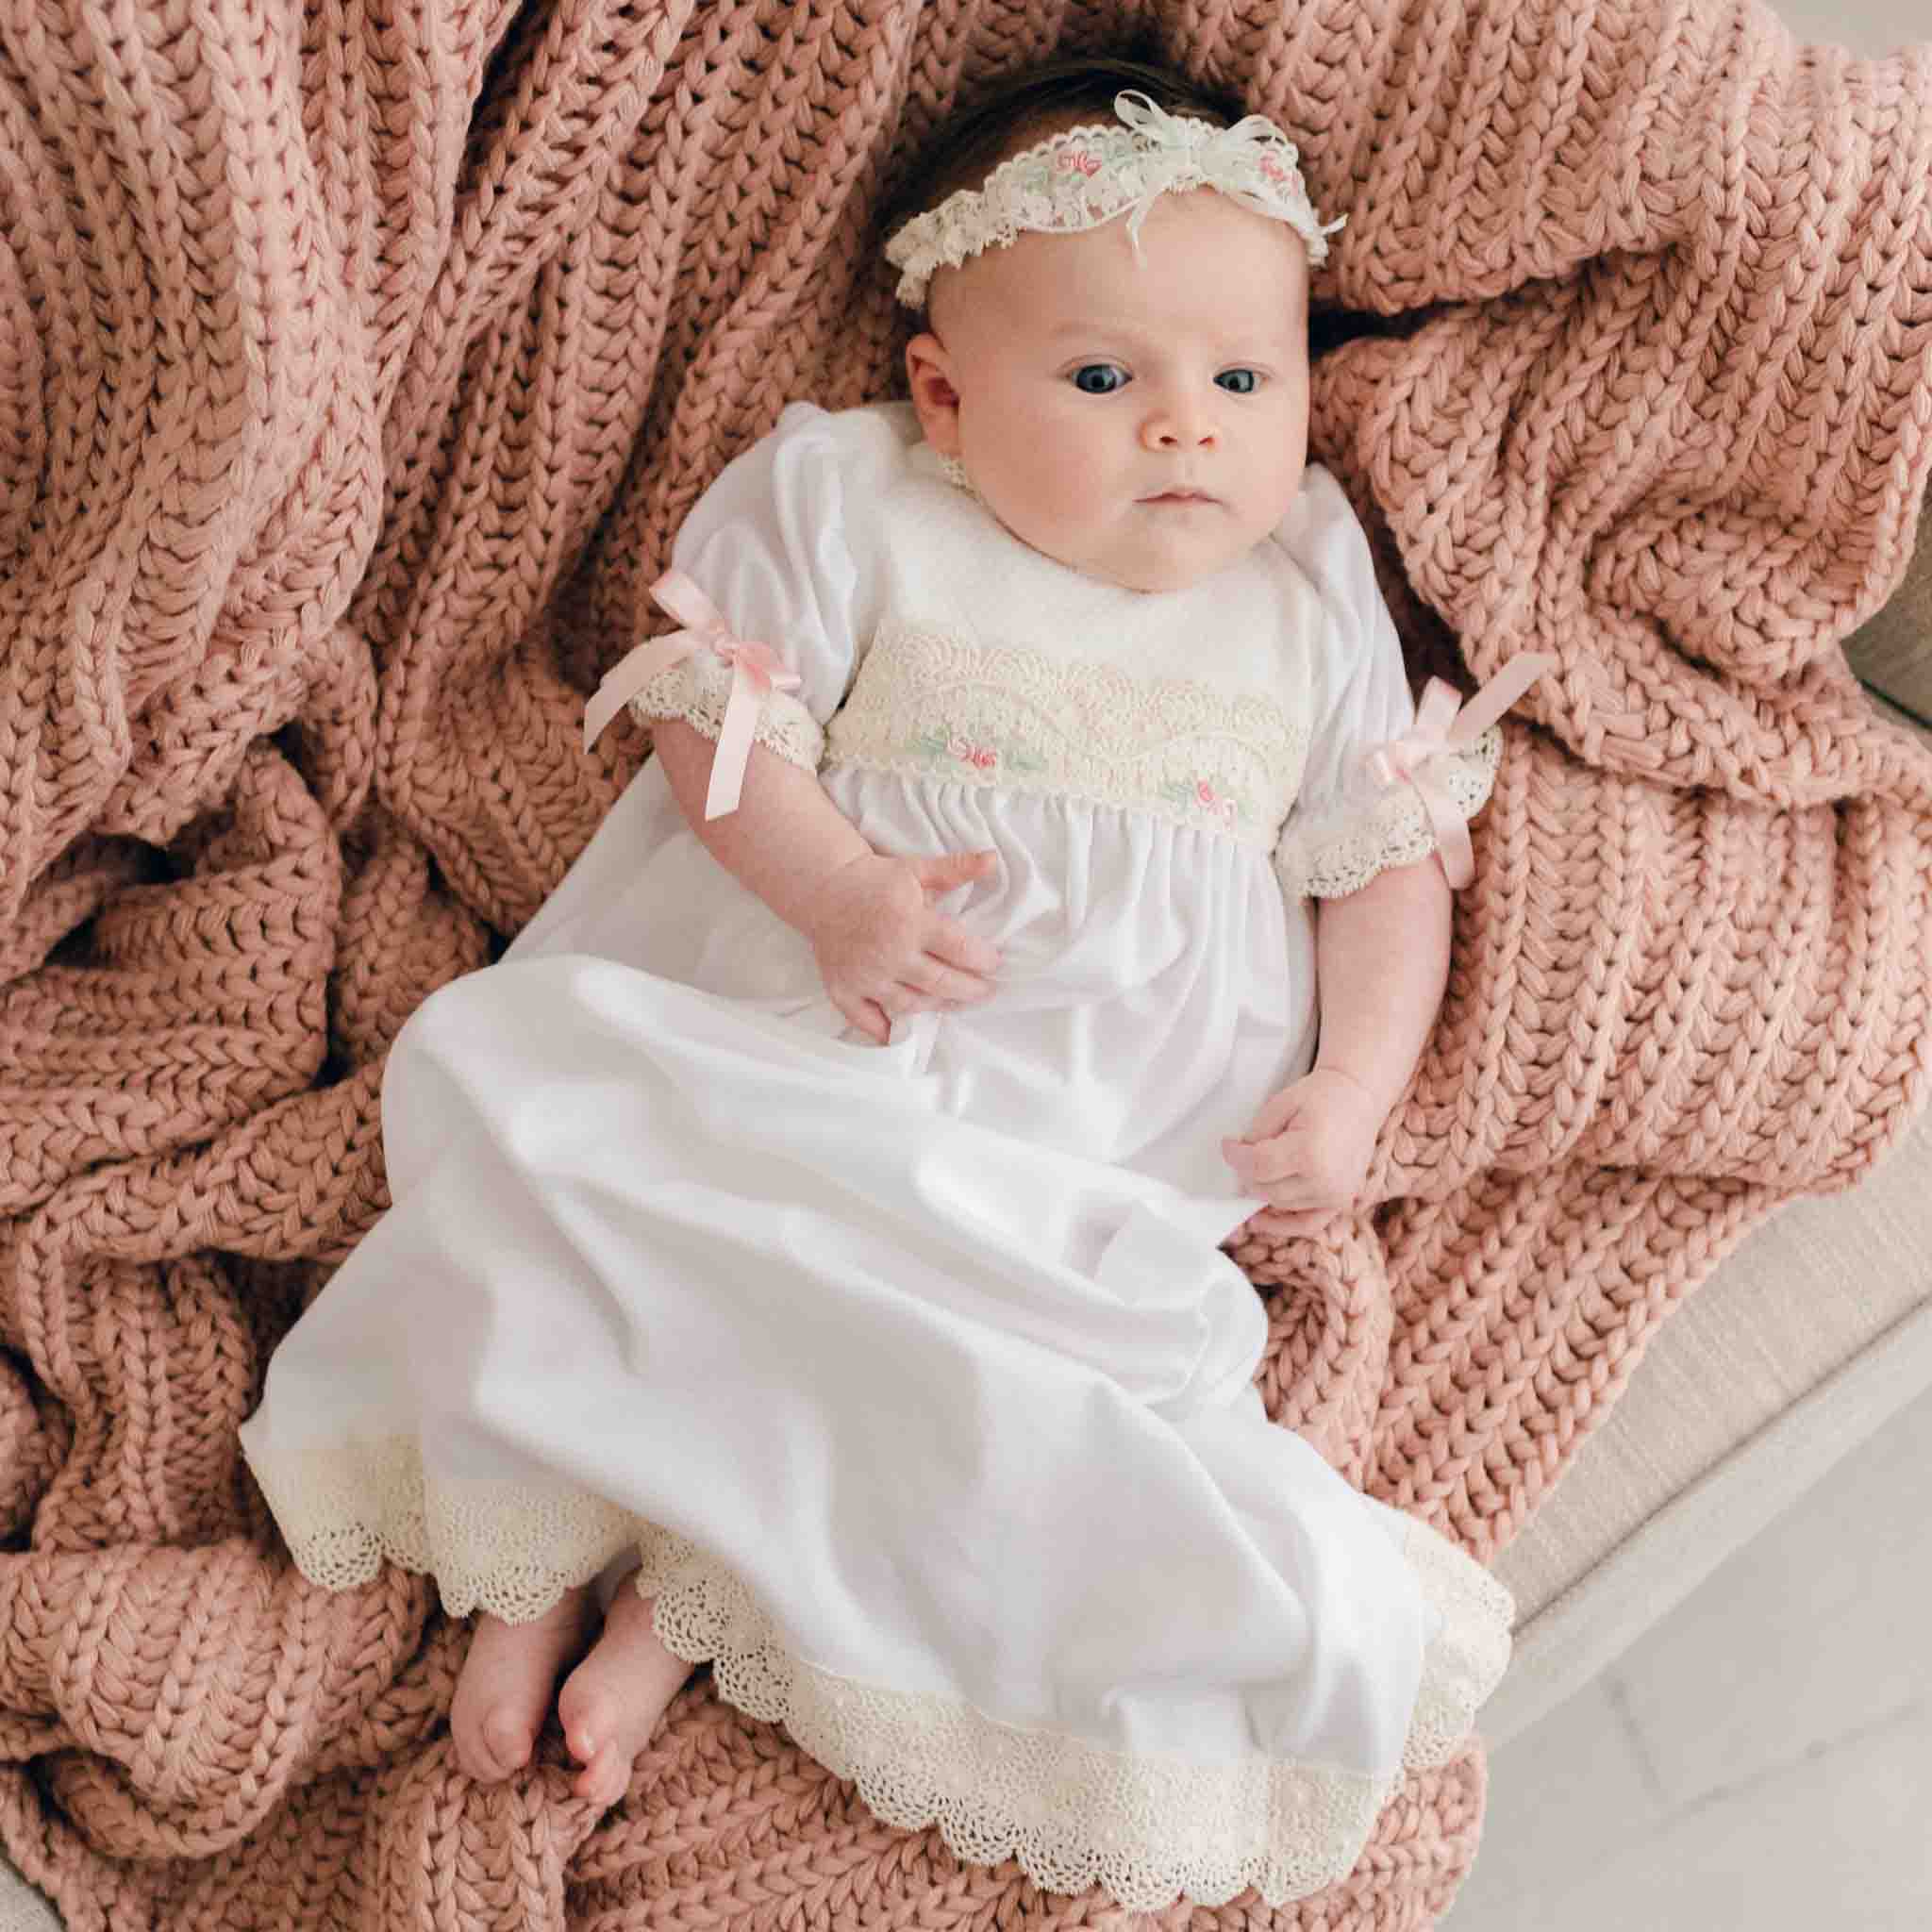 Take Me Home - Lemon Loves Layette Pink Baby Gown